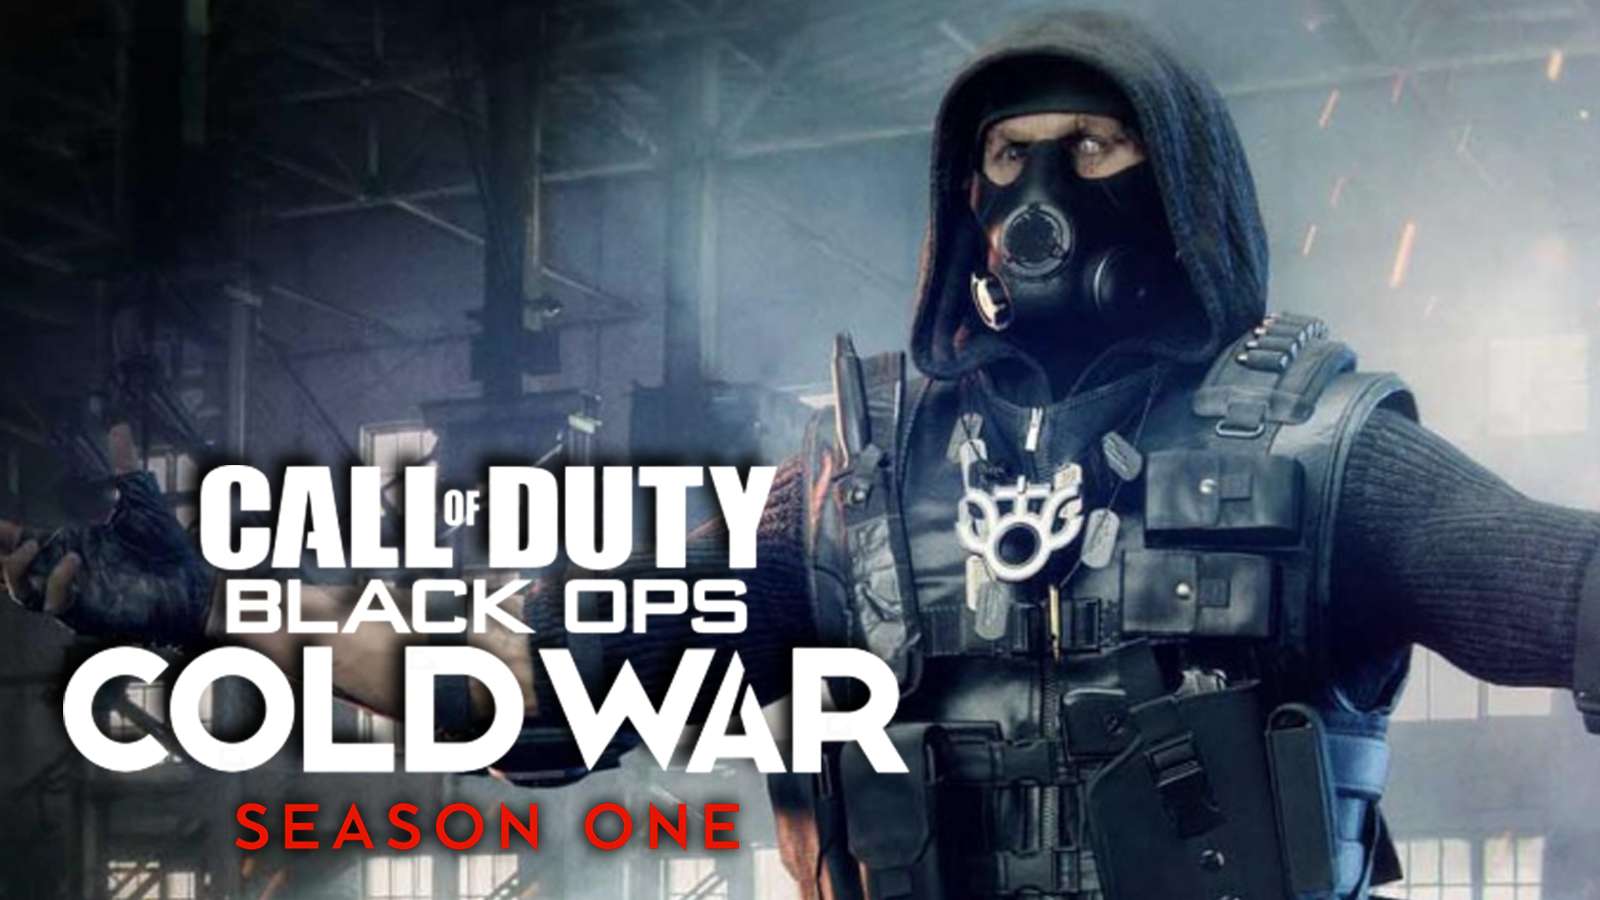 Warzone op Stitch looms over the Black Ops Cold War Season 1 logo.